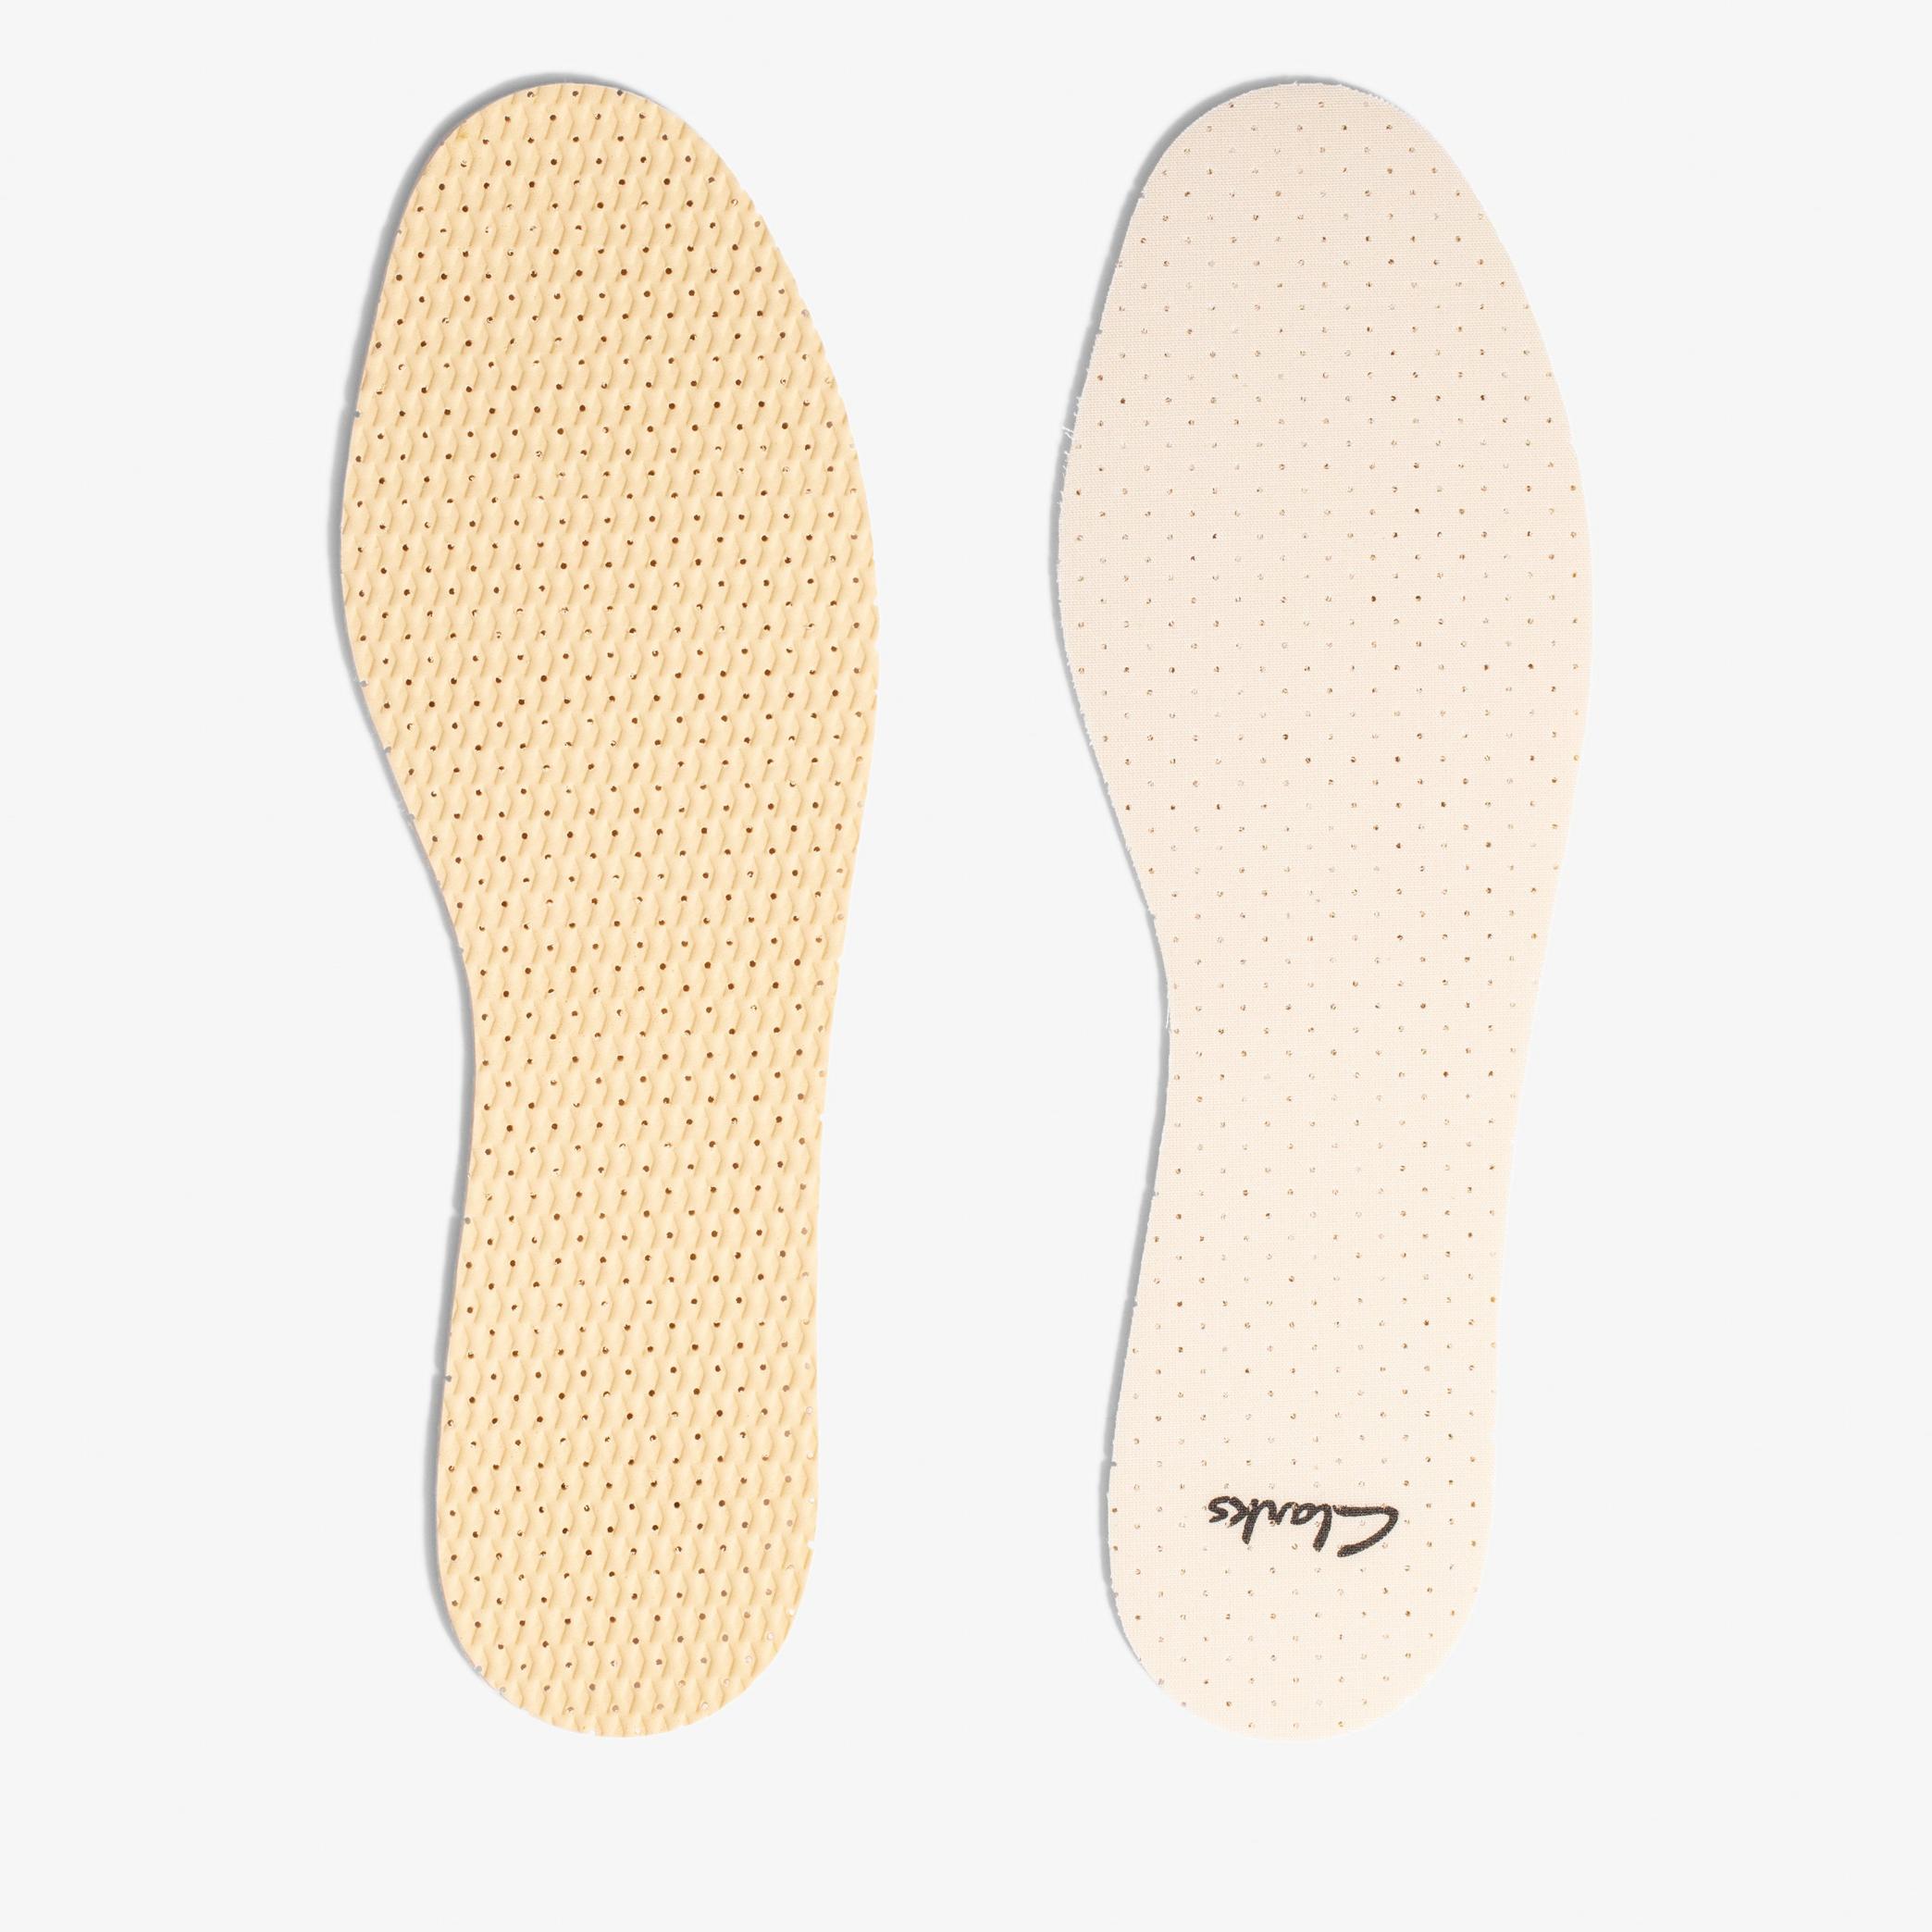 Foam Insoles size 11-12  Insoles, view 3 of 3